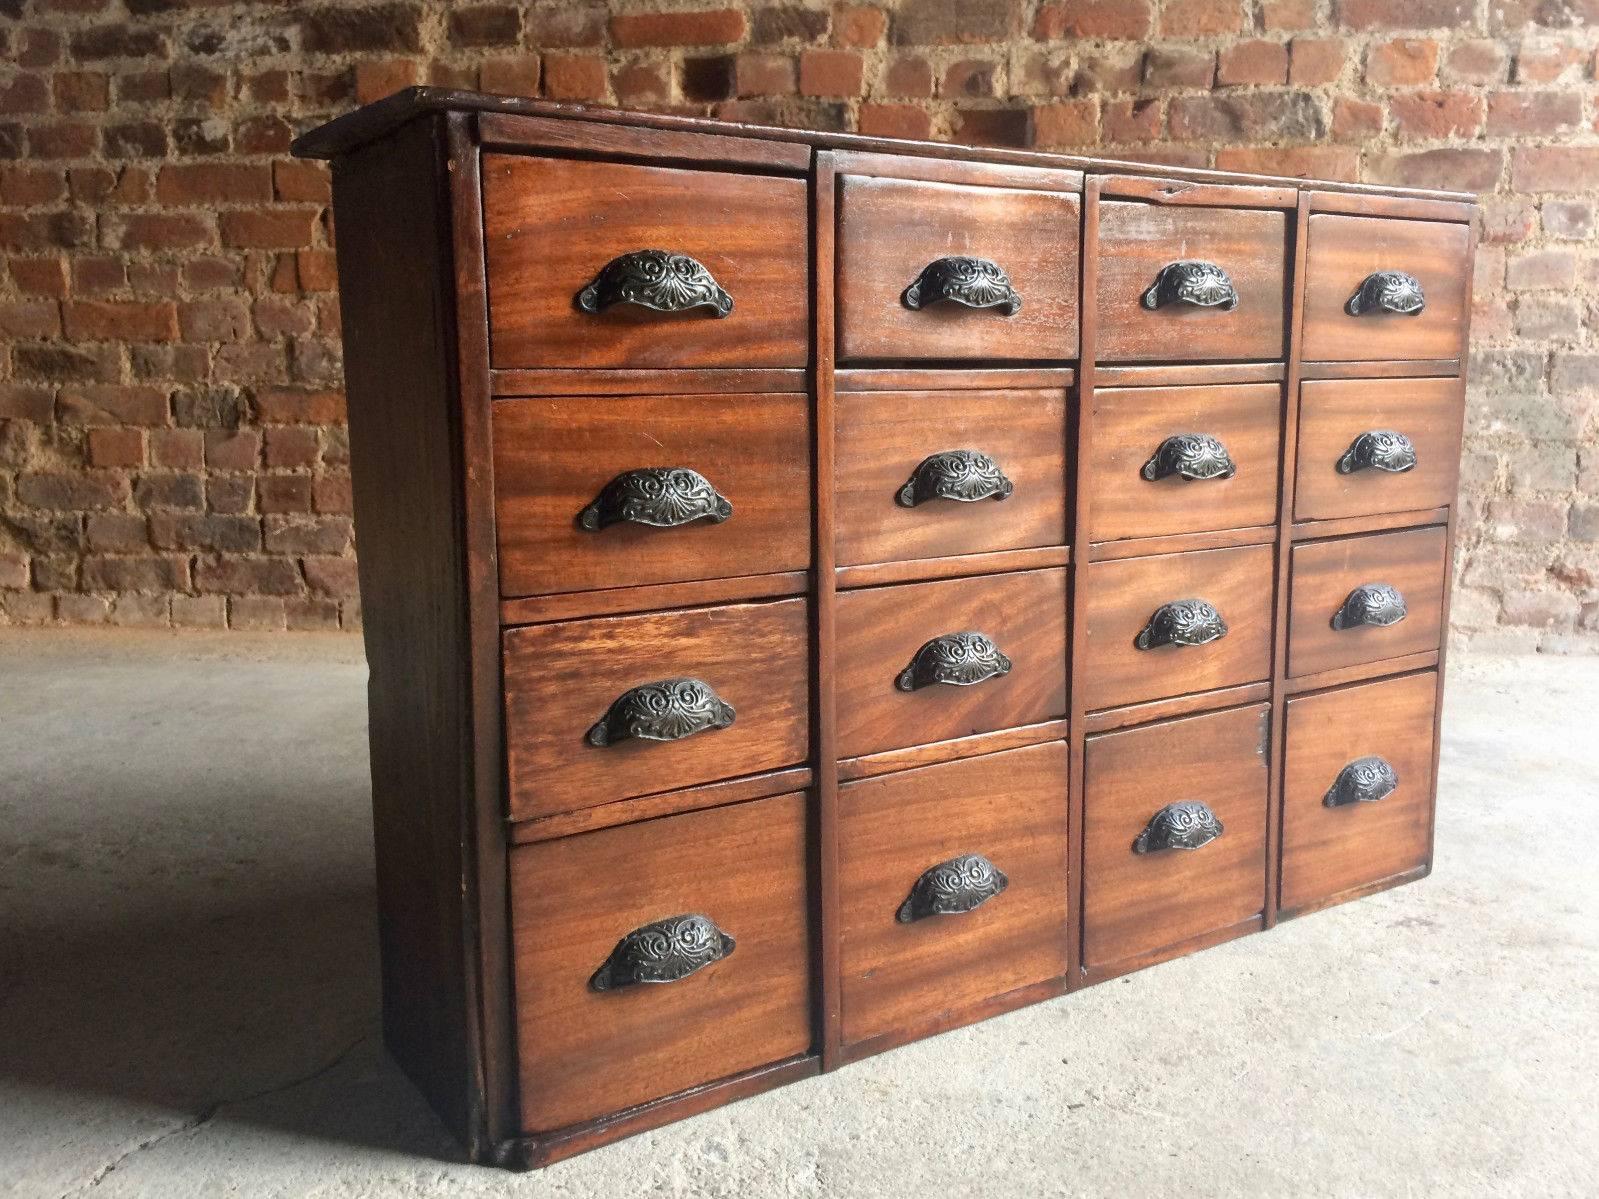 Fabulous antique 19th century mahogany Haberdashery chest of 16 drawers with shell cup iron handles.